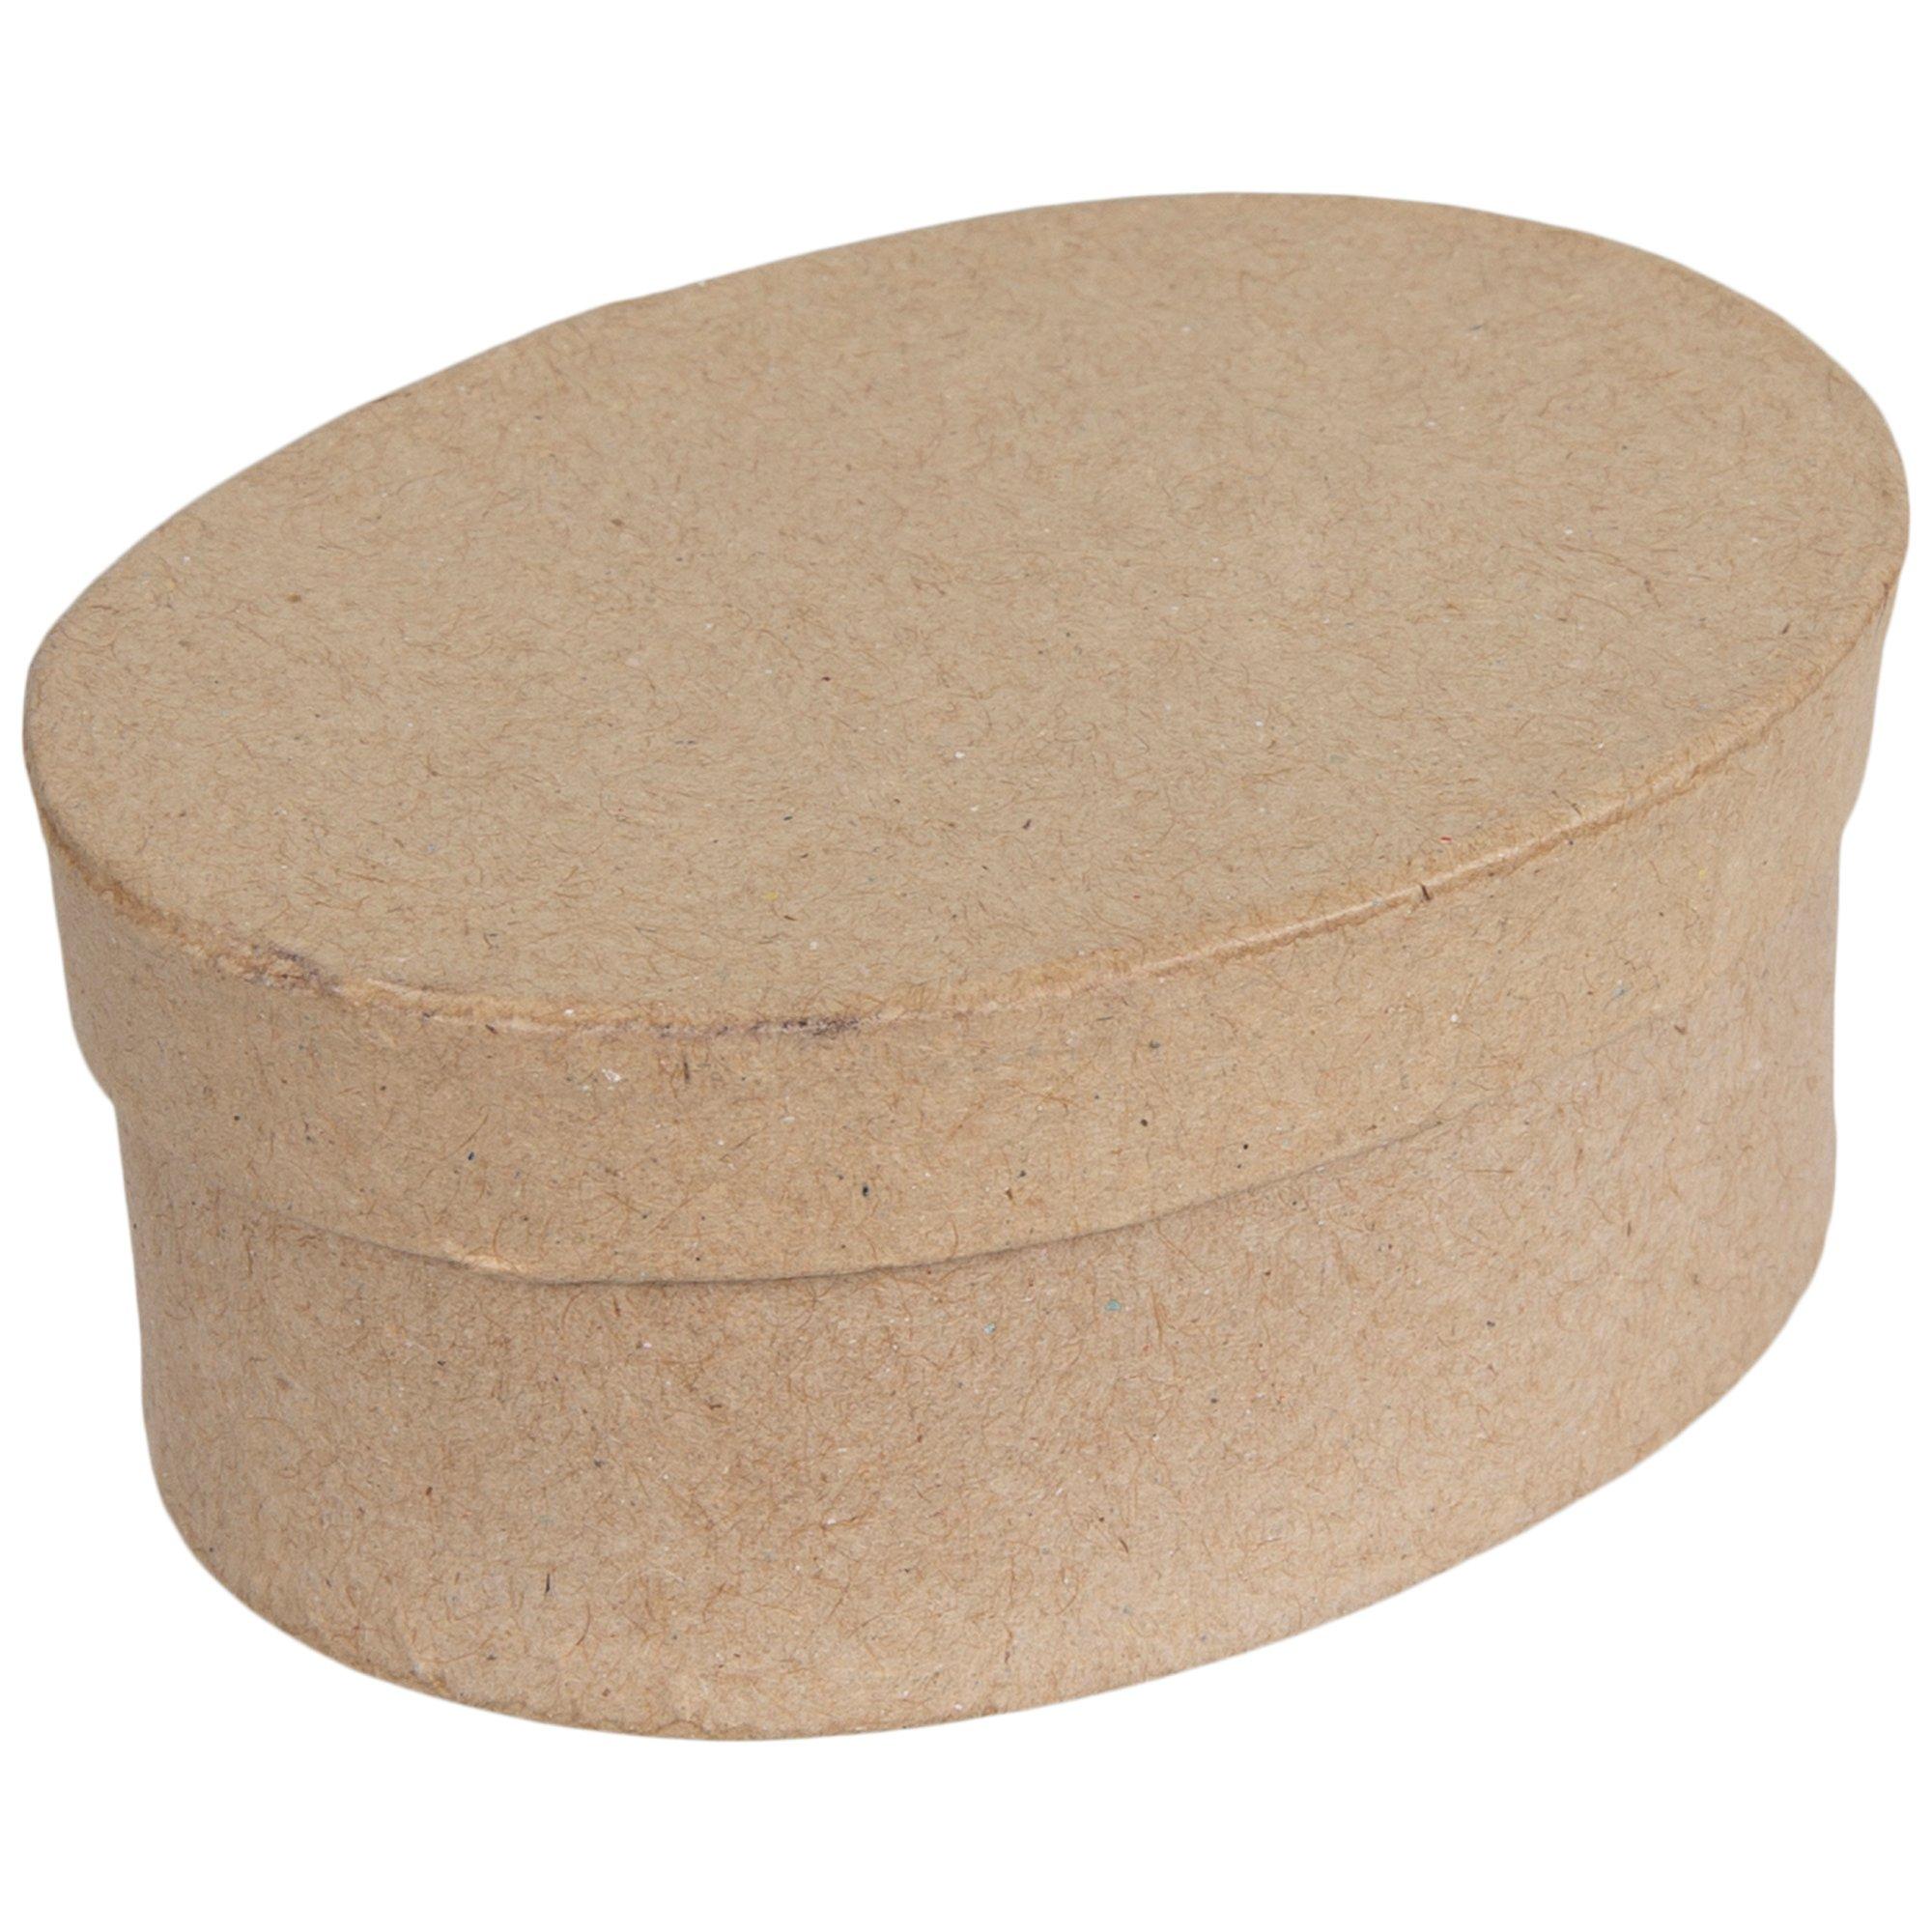 Bulk Buy of 24 Paper Mache Oval Shaped 3-1/2 Boxes with Lids